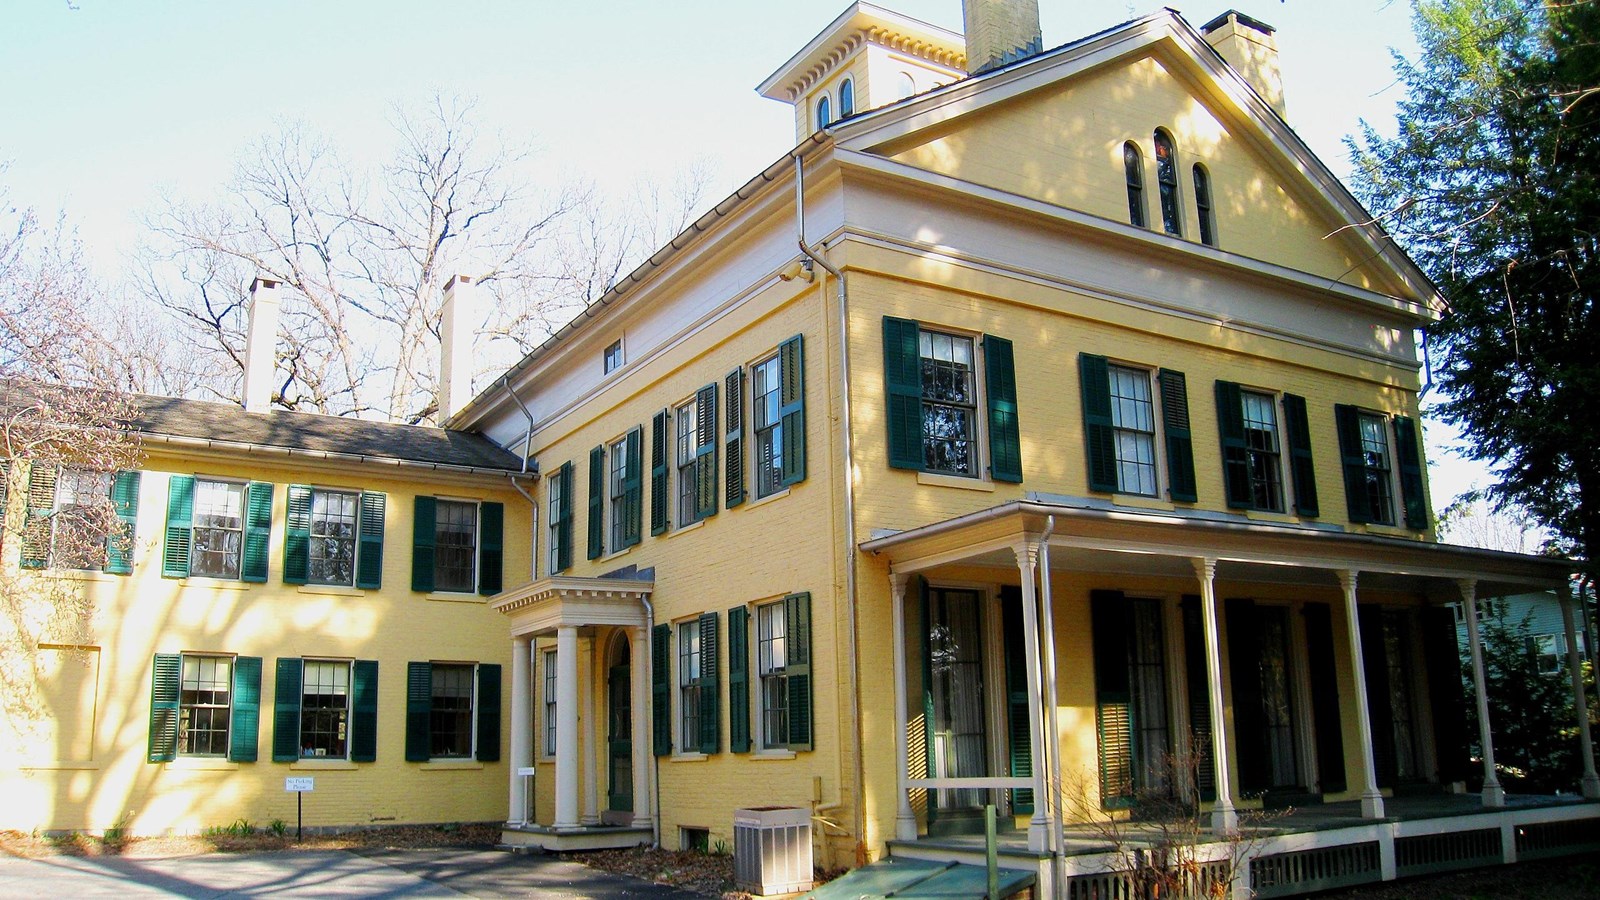 A Federal-style yellow house with green shutters and white trim. 